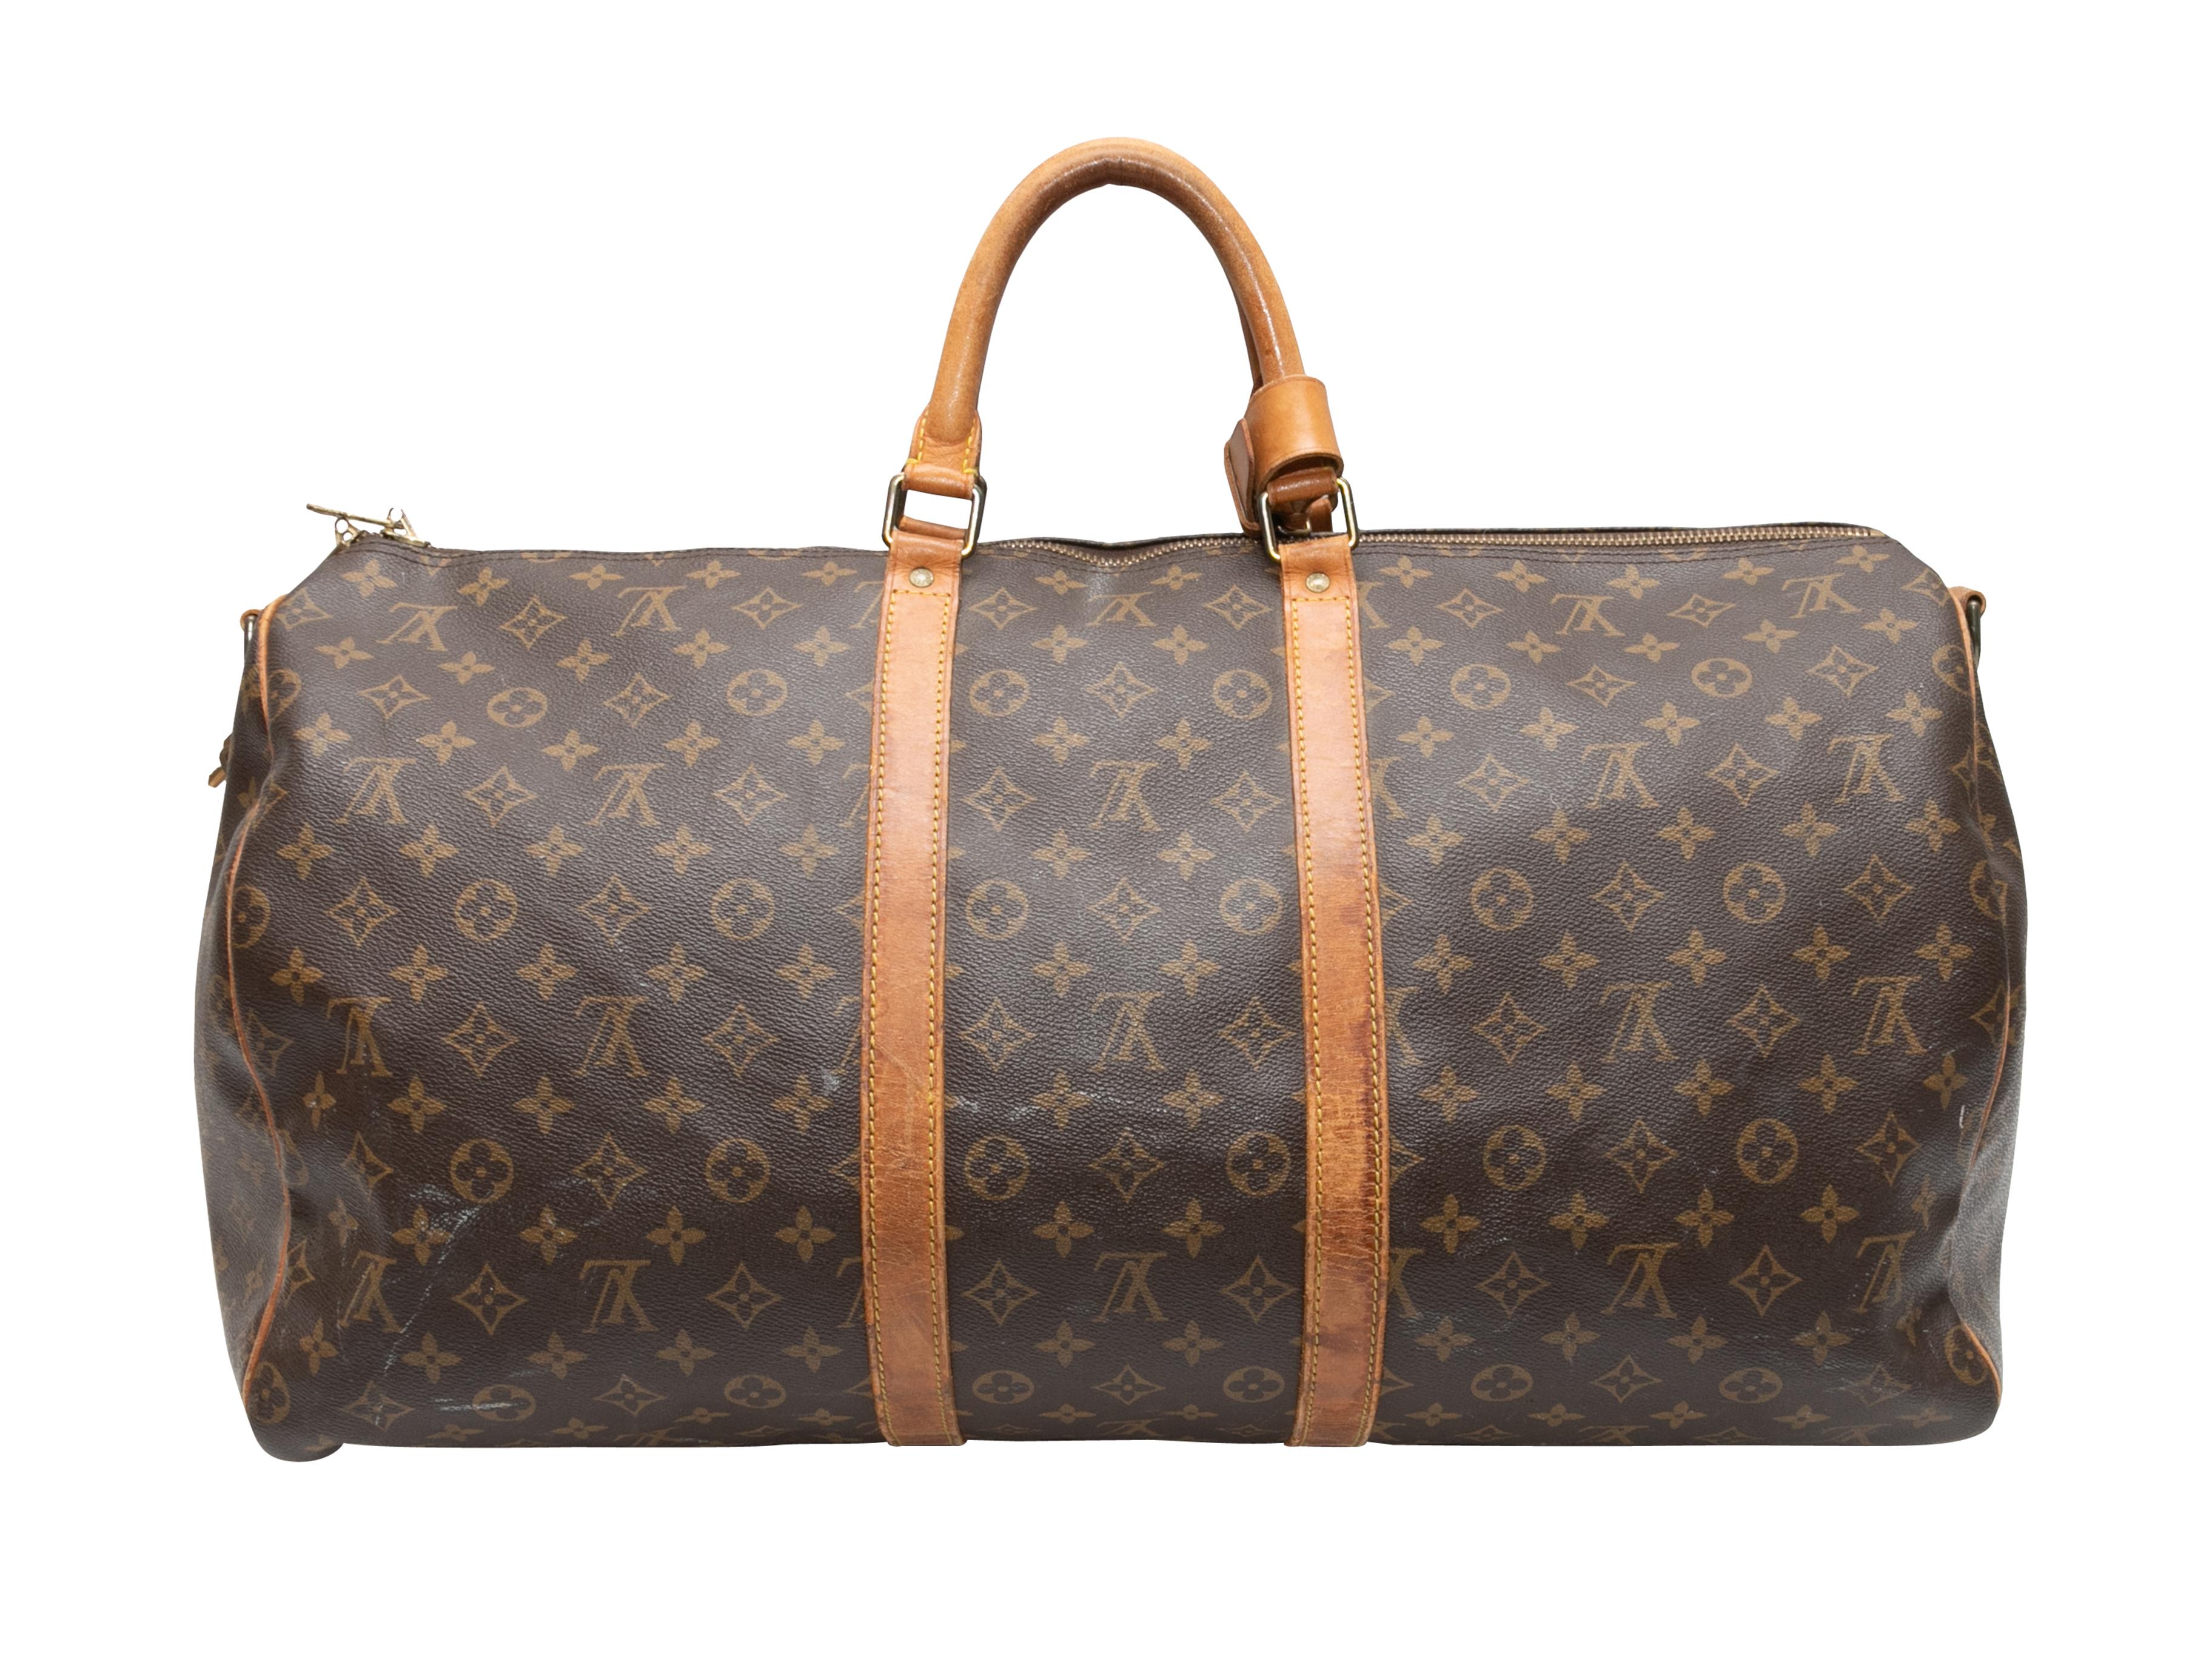 Brown Louis Vuitton 1989 Keepall Bandouliere 45 Bag. The Keepall Bandouliere 45 Bag features a monogram coated canvas body, leather trim, gold-tone hardware, dual rolled top handles, a single shoulder strap, and a top zip closure. 20